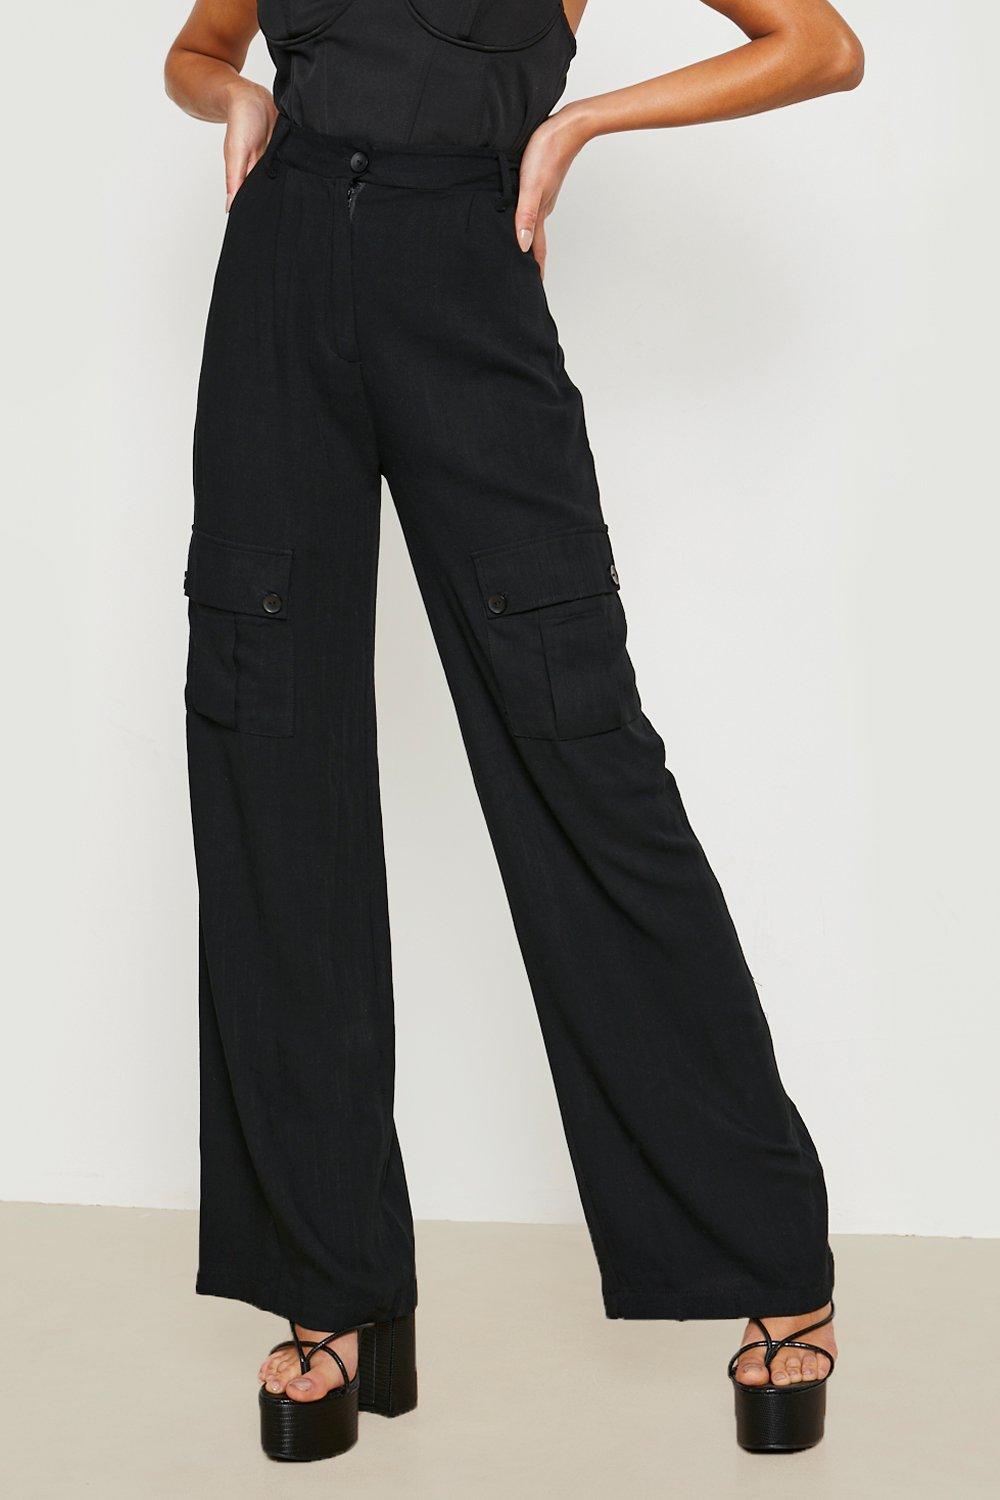 Boohoo Synthetic Wide Leg Slouchy Cargo Trousers Womens Clothing Trousers Slacks and Chinos Cargo trousers 